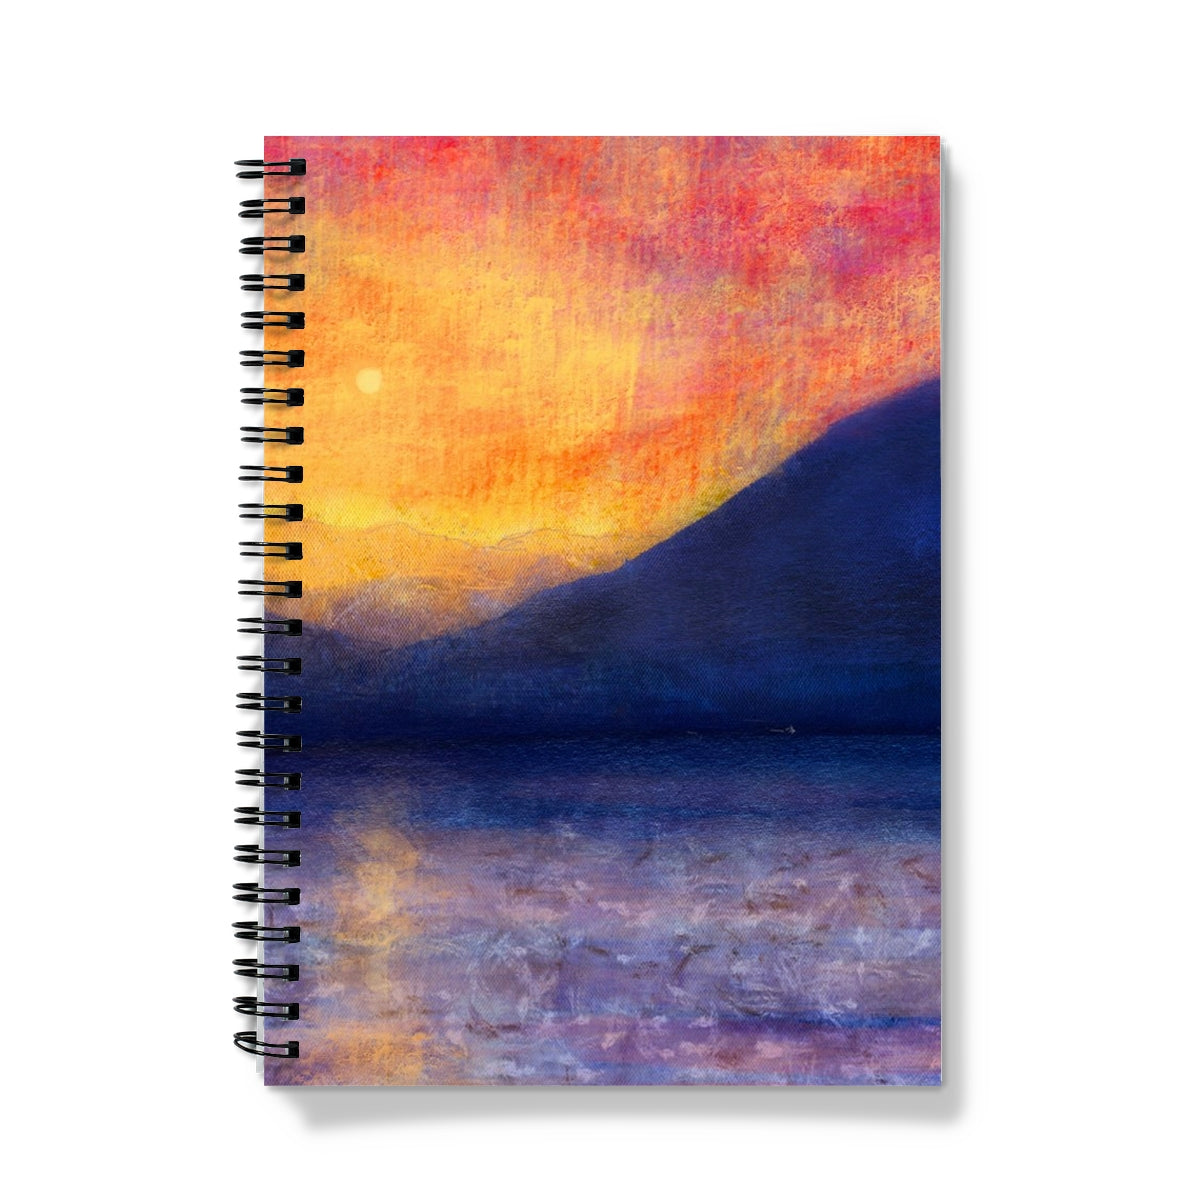 Sunset Approaching Mull Art Gifts Notebook-Journals & Notebooks-Hebridean Islands Art Gallery-A5-Lined-Paintings, Prints, Homeware, Art Gifts From Scotland By Scottish Artist Kevin Hunter